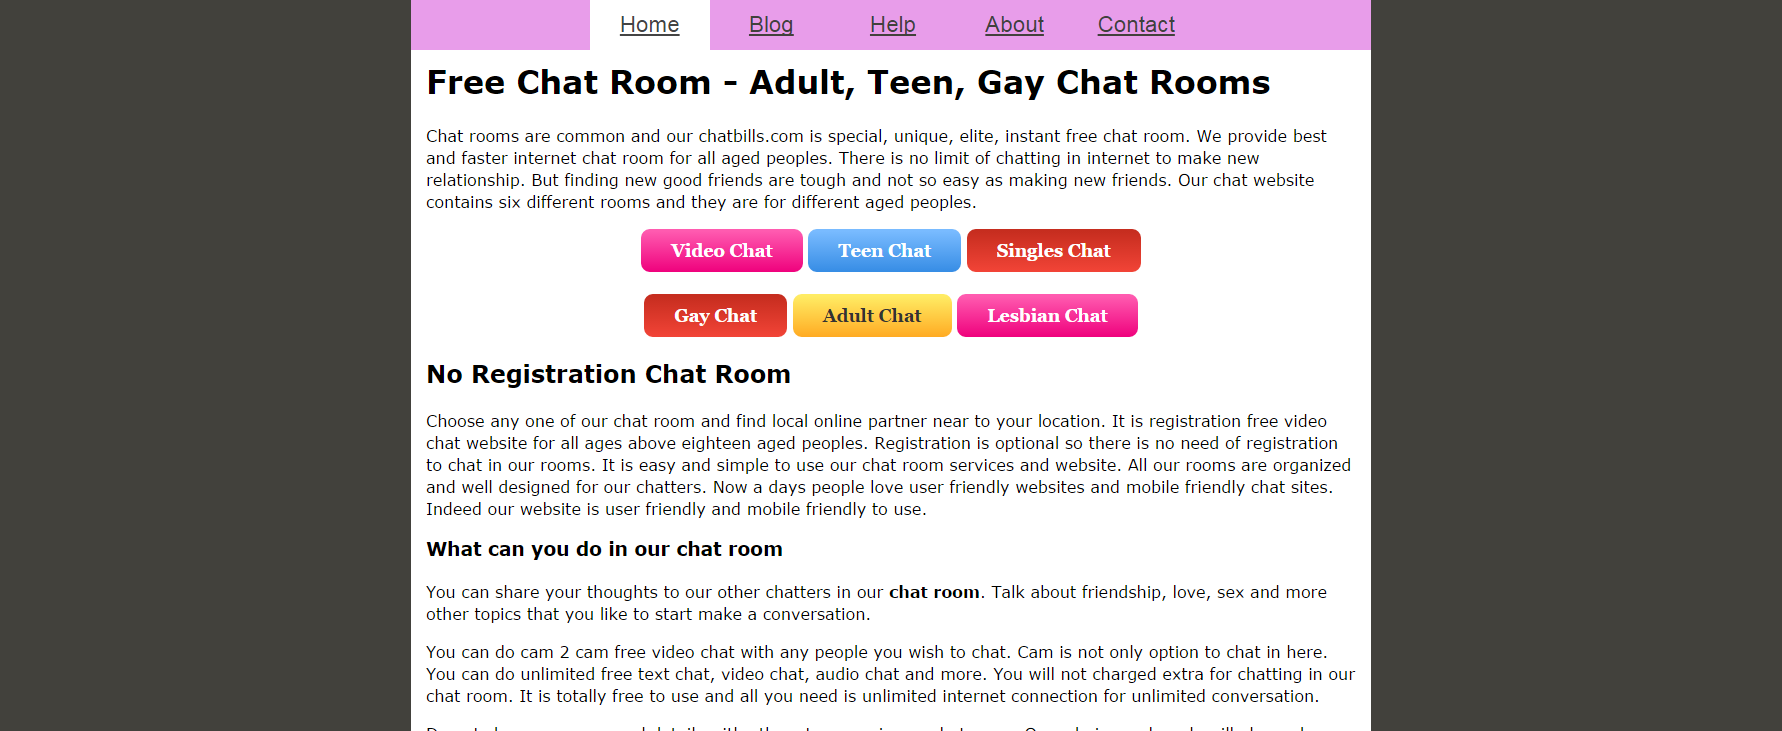 gay chat room sex